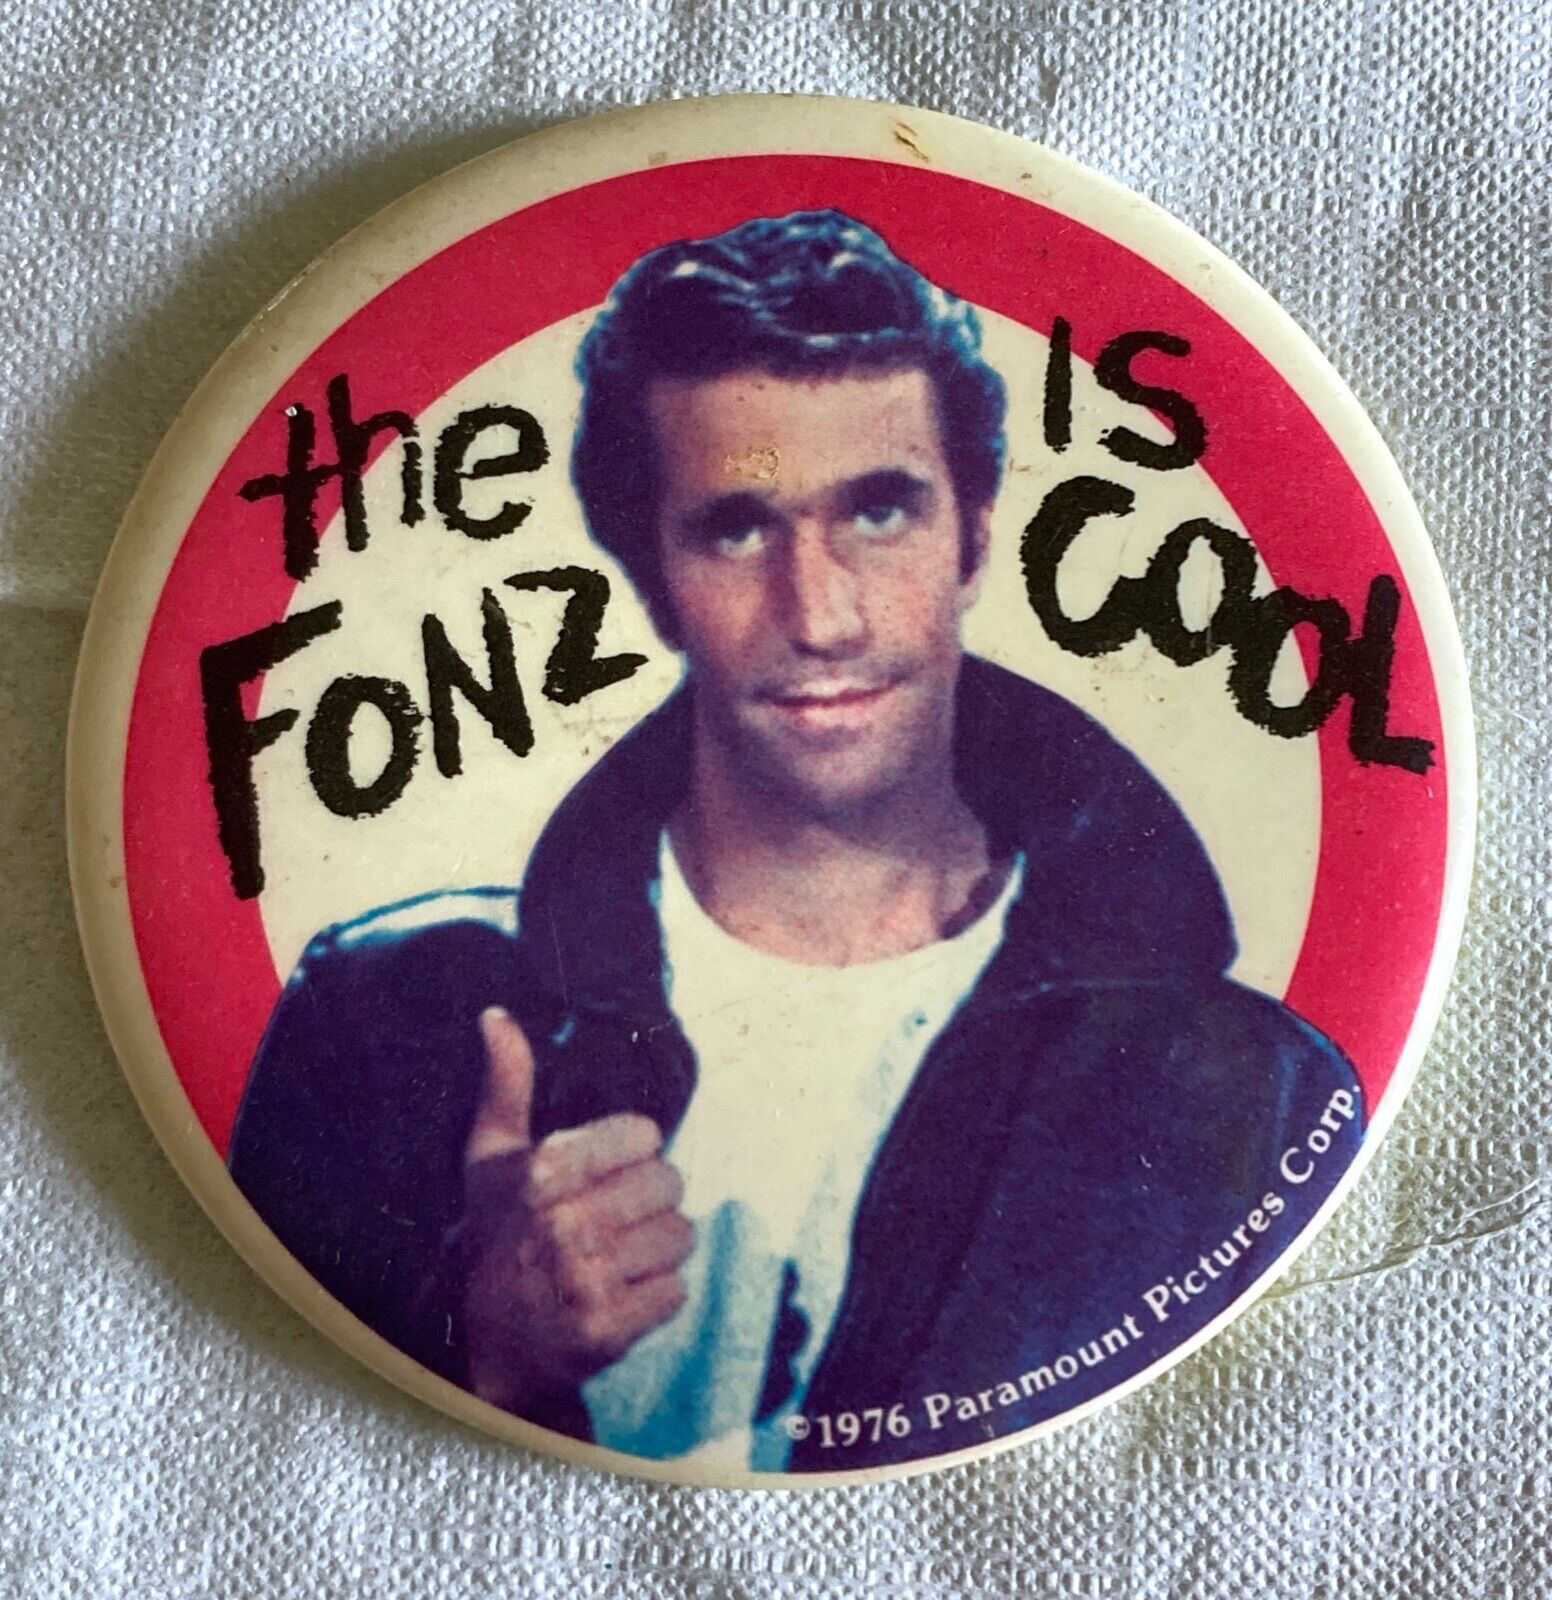 1976 Vintage The Fonz is Cool Pin, Paramount Pictures.